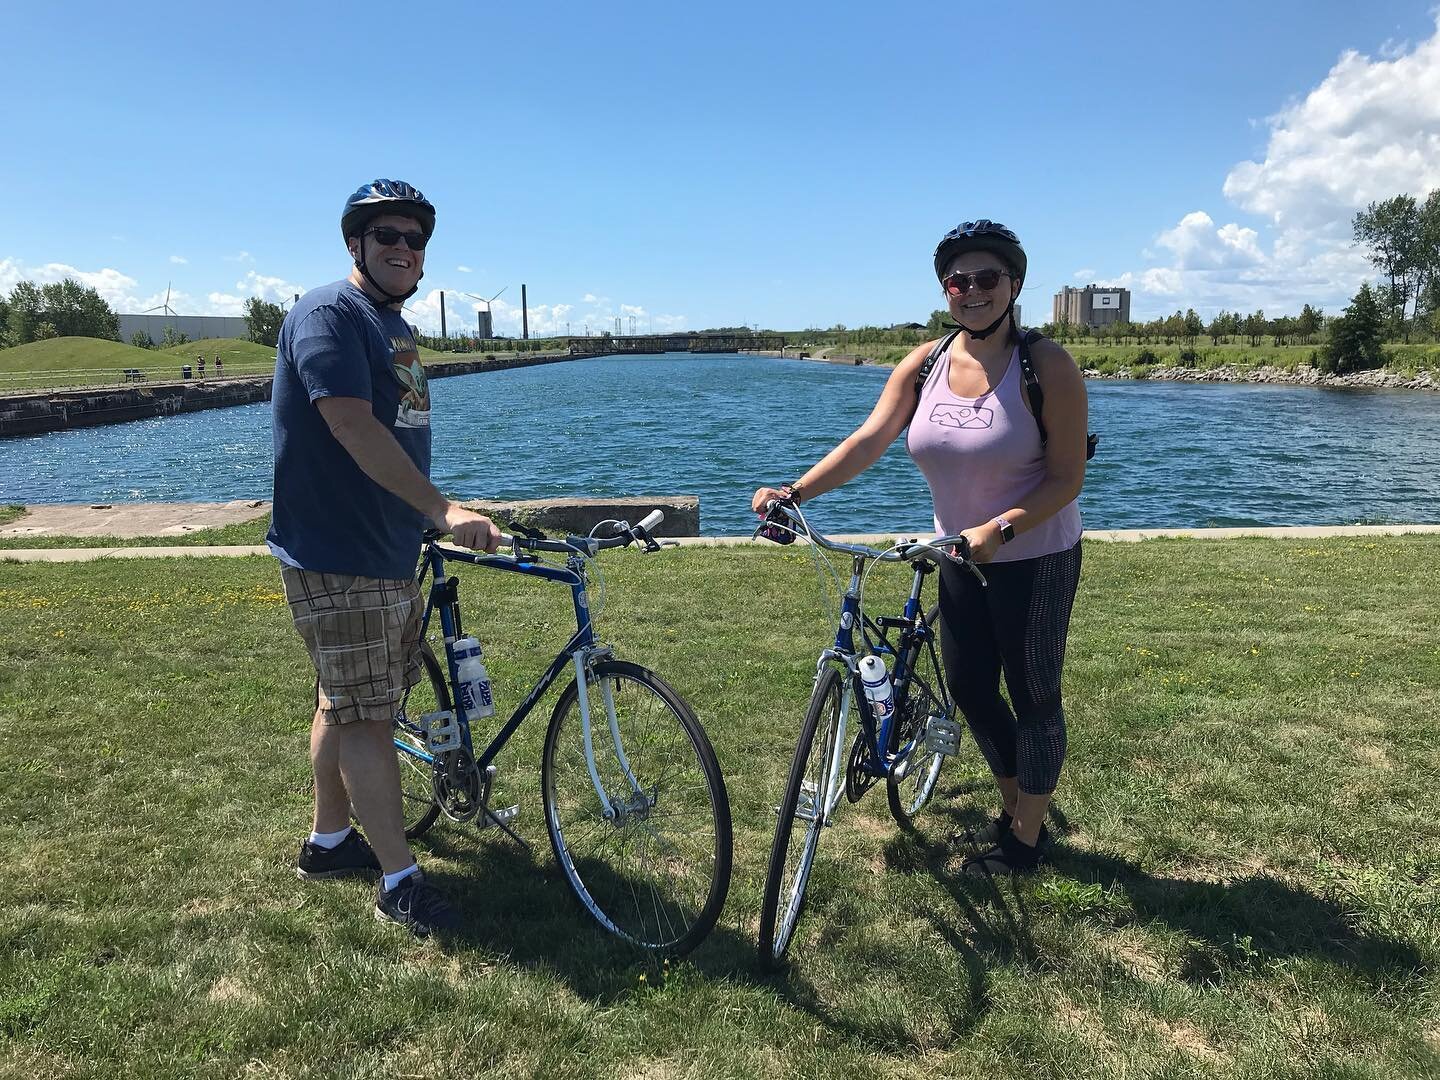 Buffalo’s Outer Harbor is a great place to explore